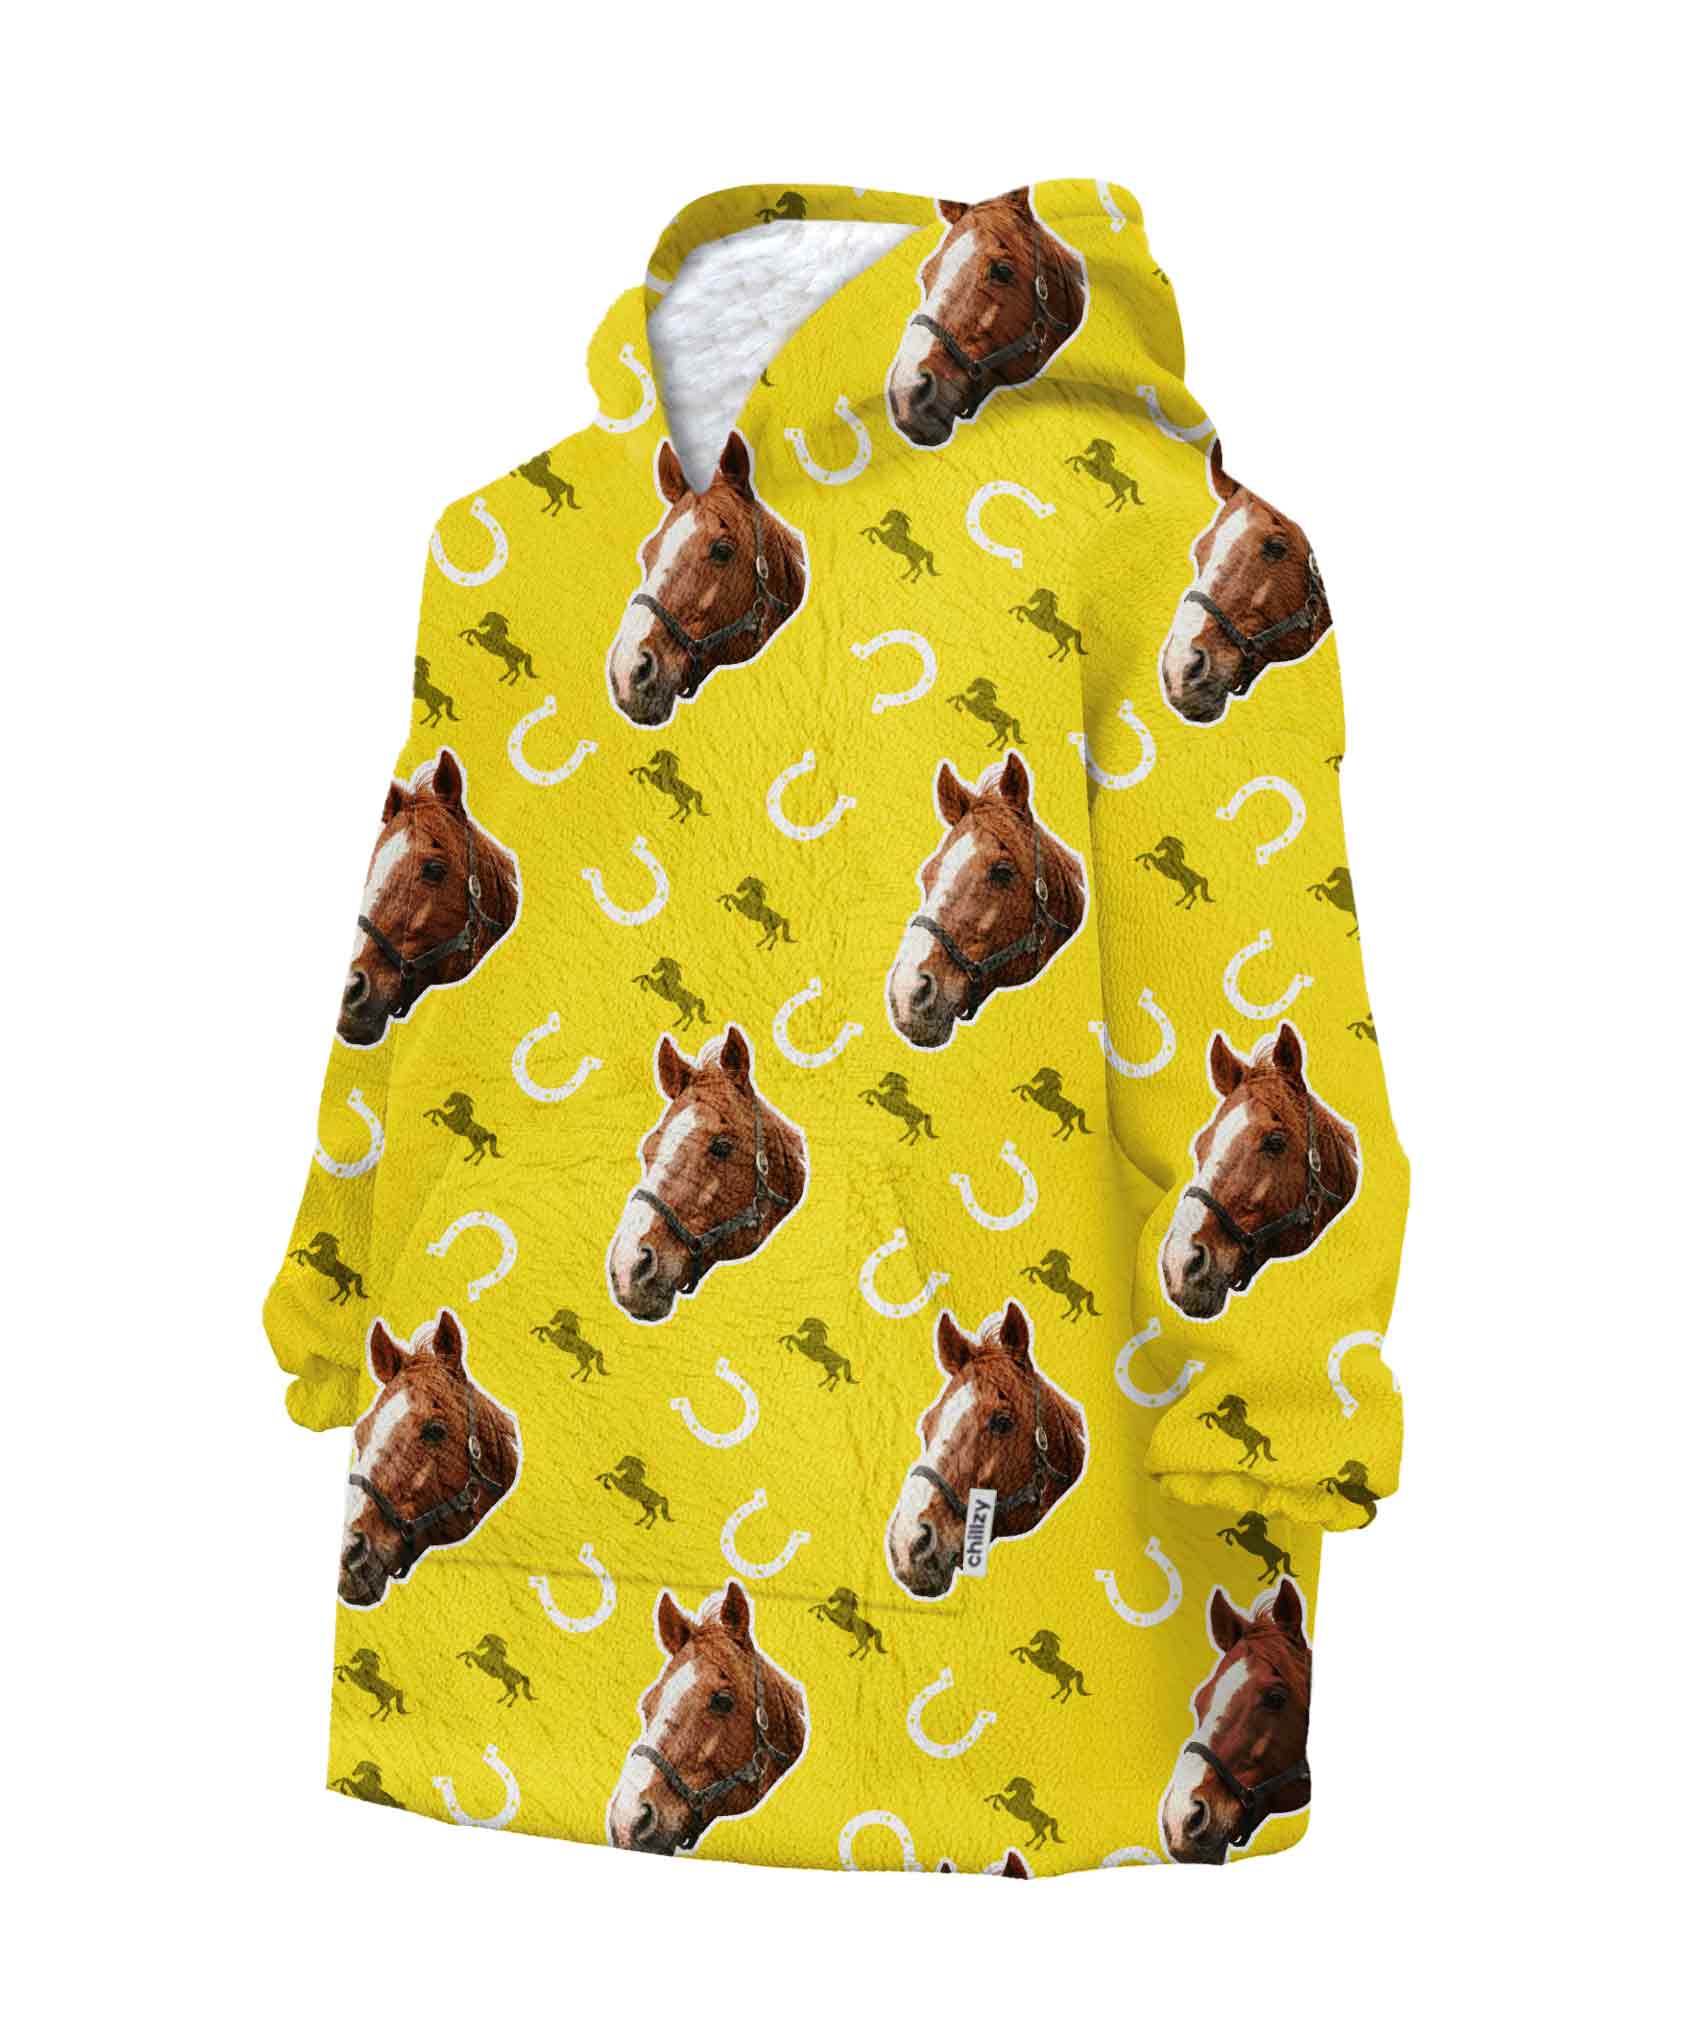 Your Horse Chillzy Kids Hoodie Blanket